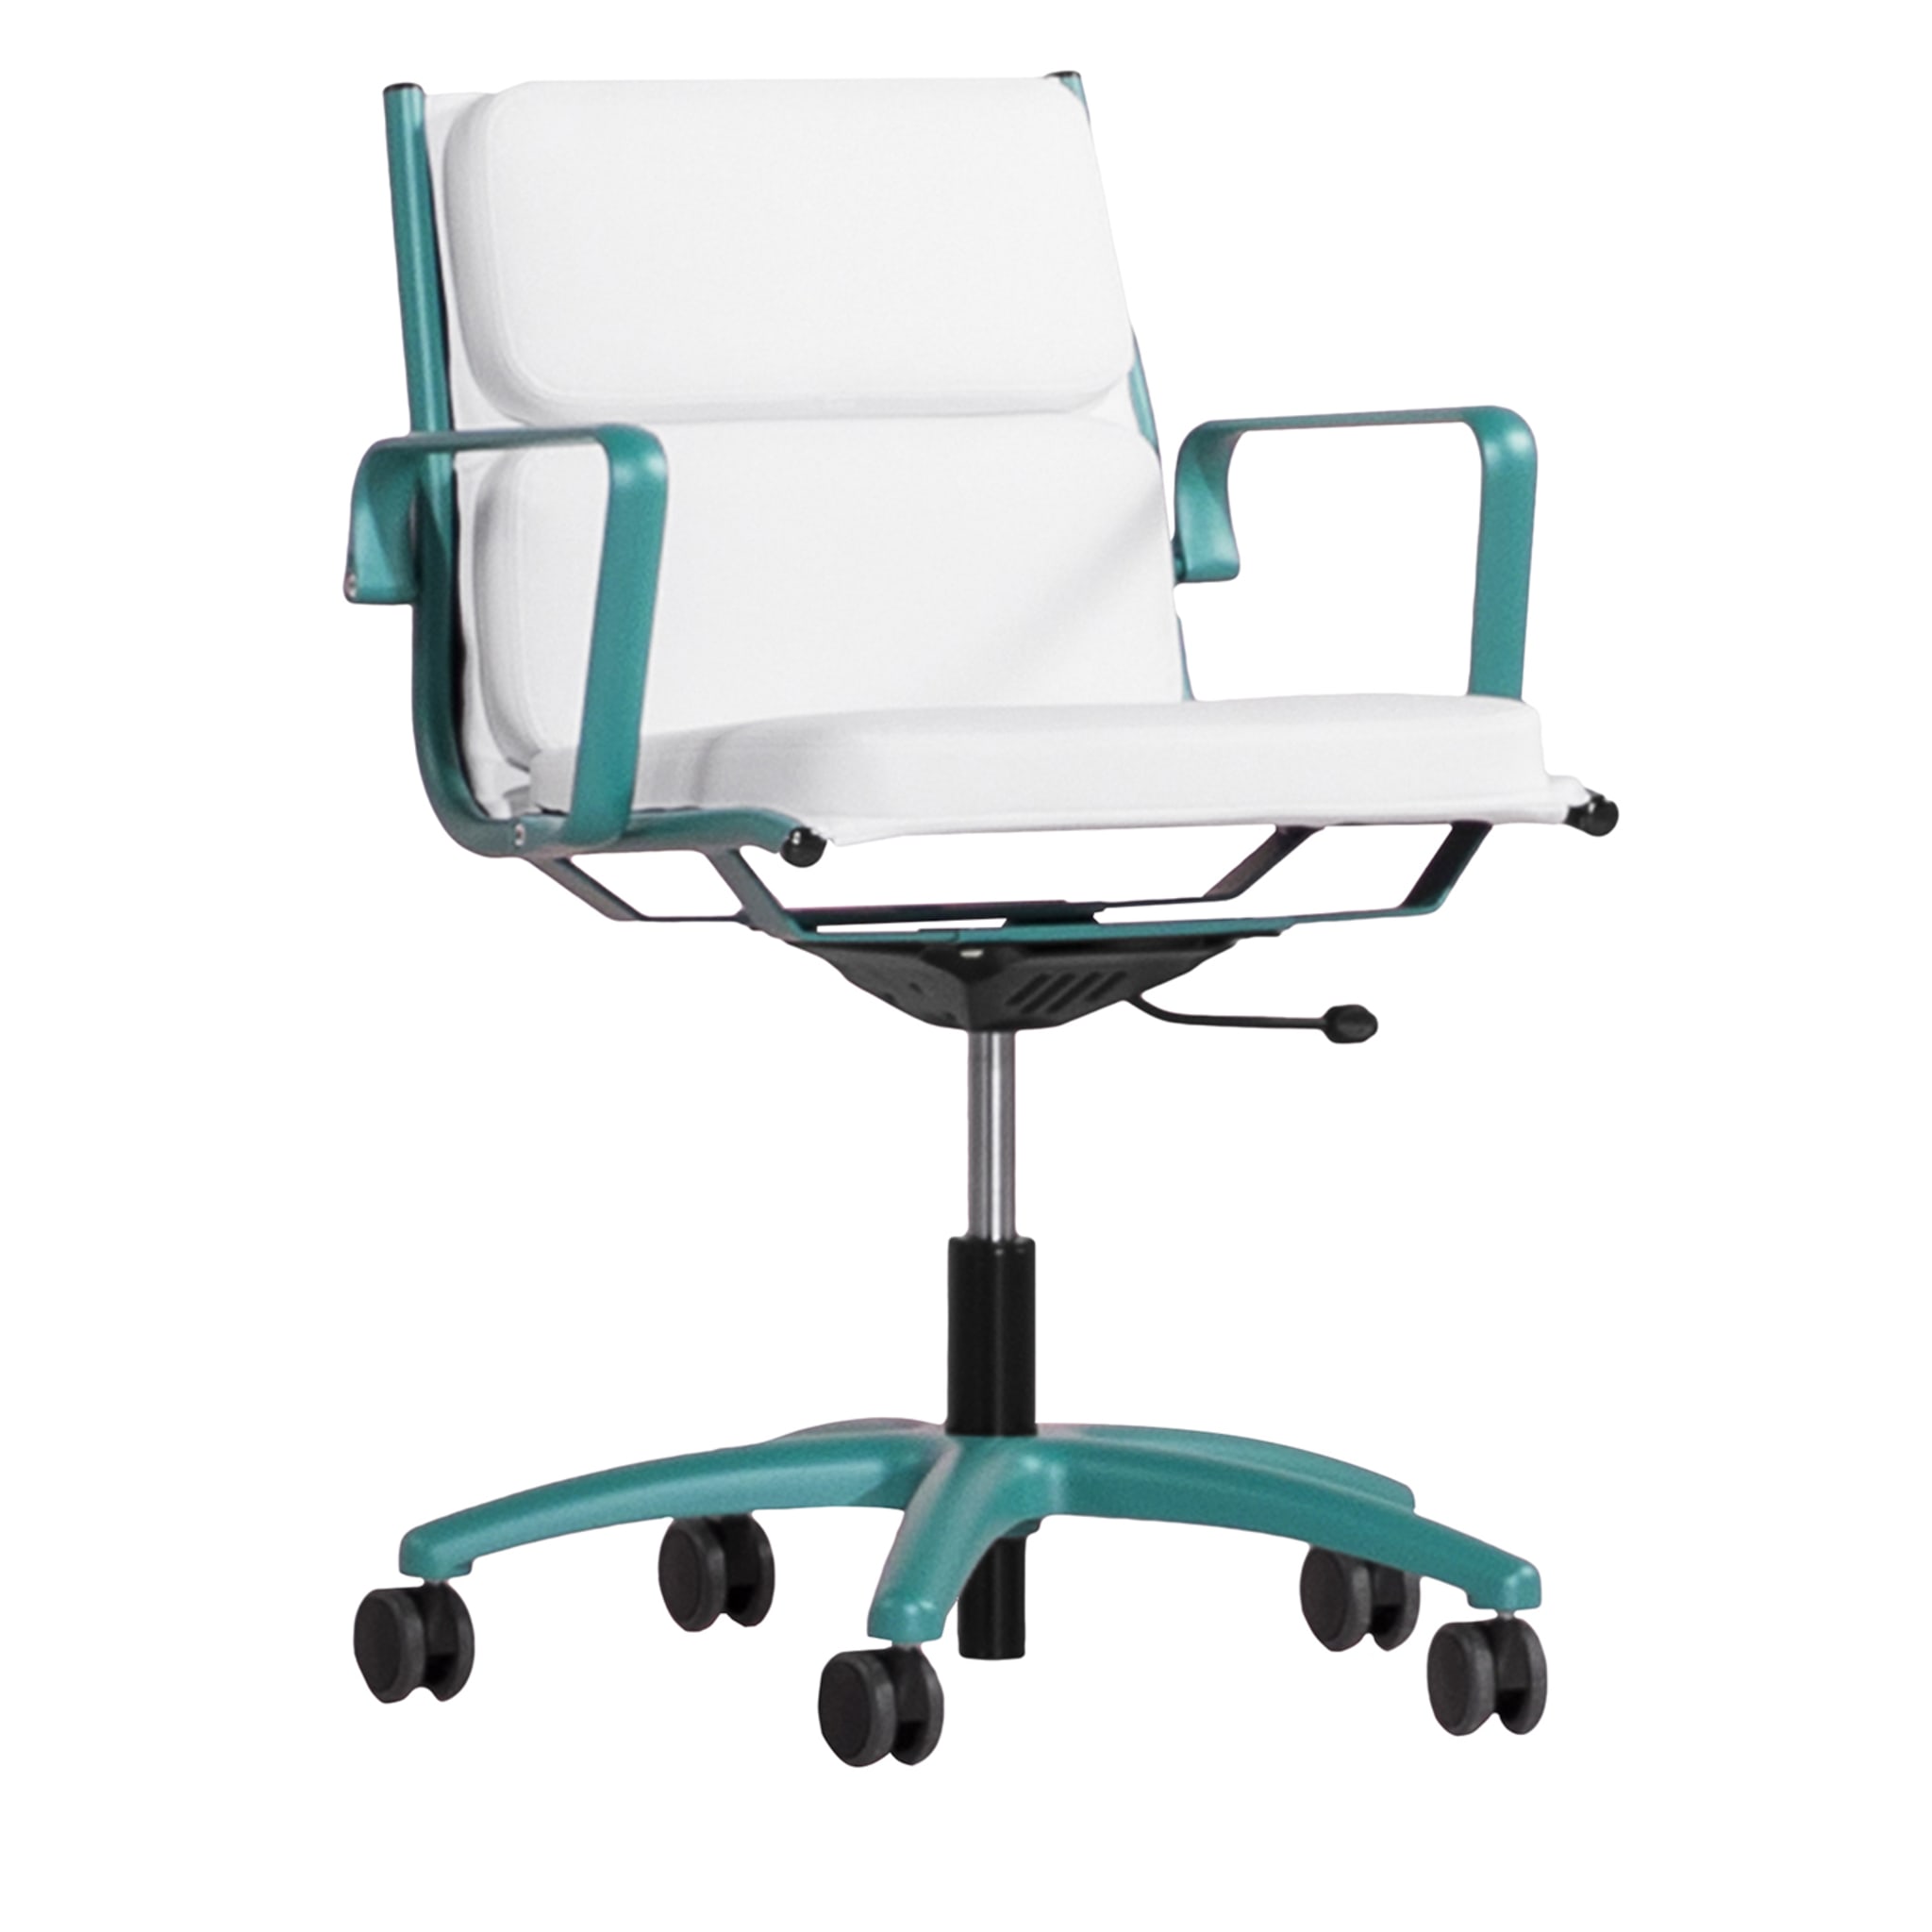 Light Low White and Green Swivel Armchair #2 - Main view